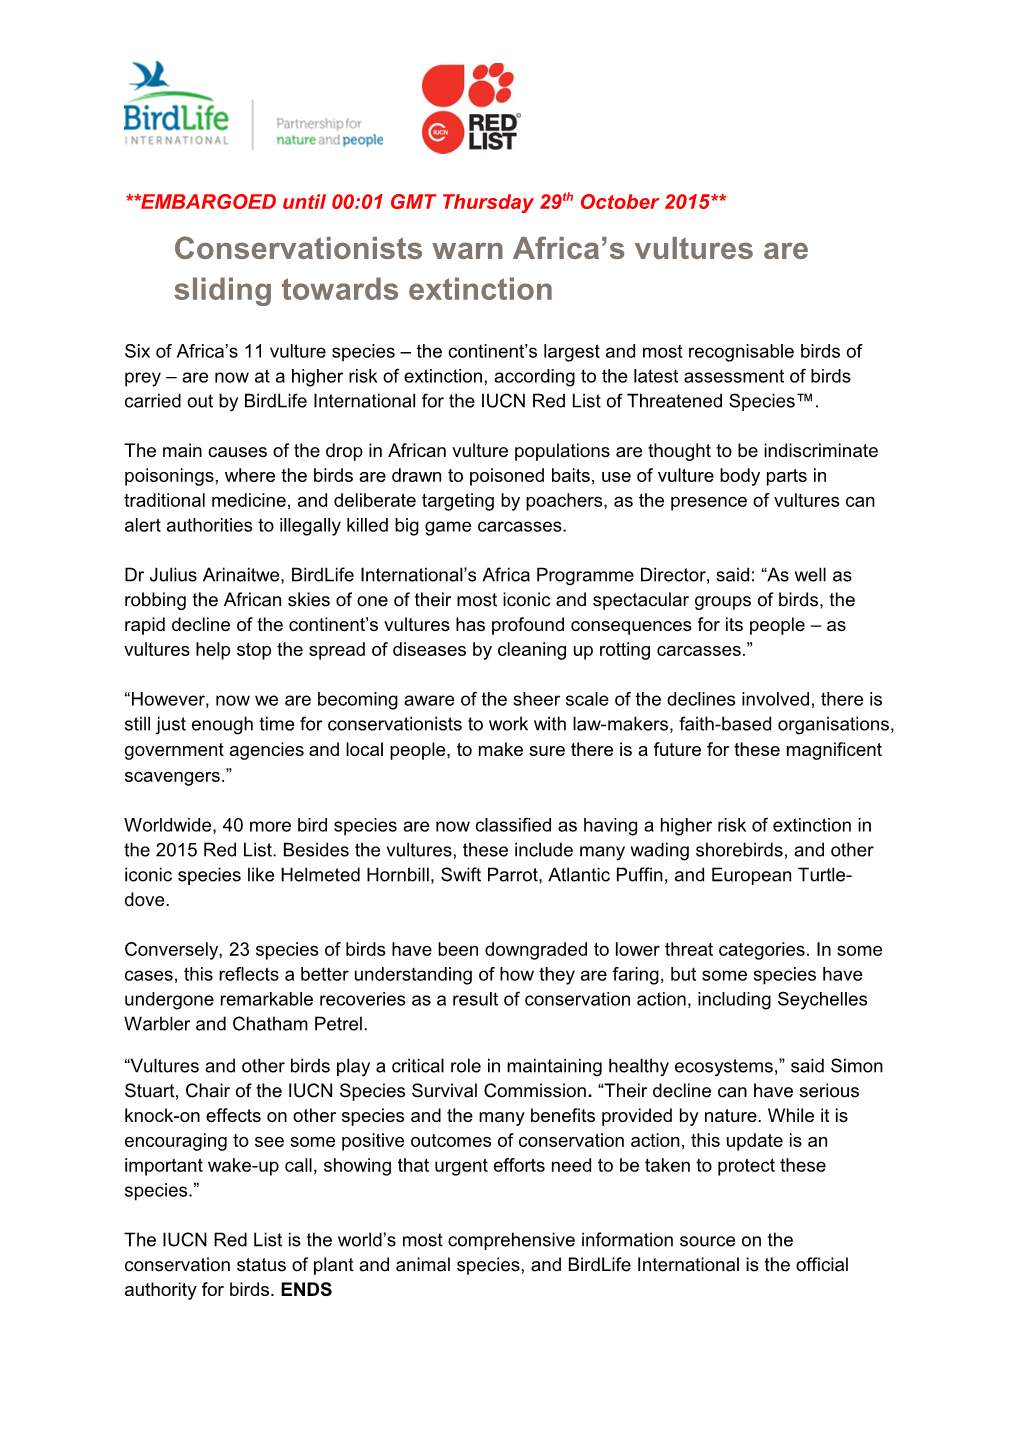 EMBARGOED Until 00:01 GMT Thursday 29Th October 2015 Conservationists Warn Africa S Vultures